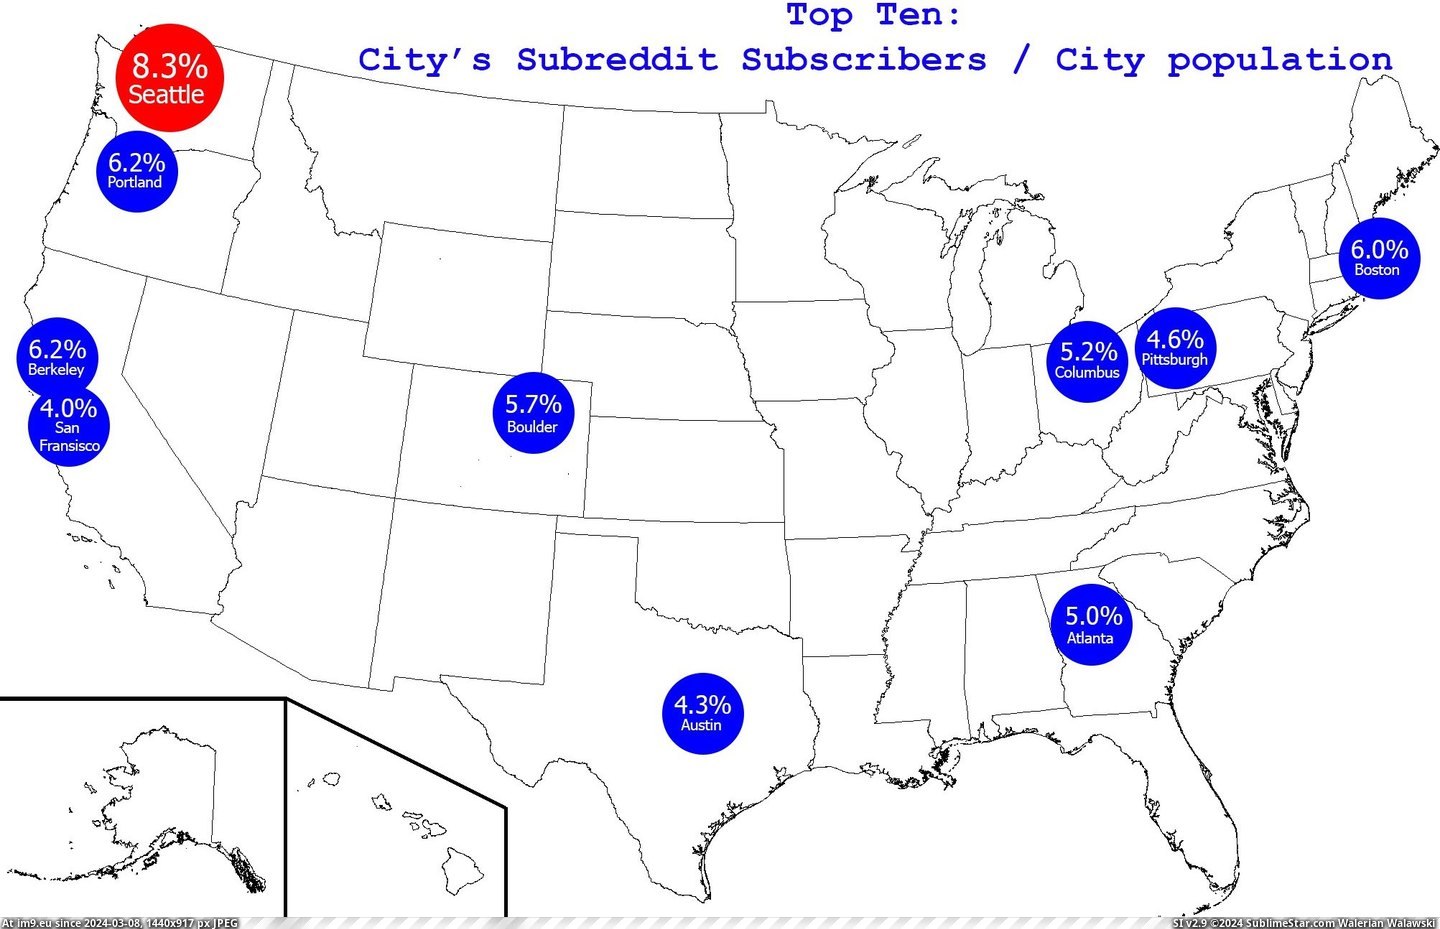 #City #Data #Subscribed #Population [Dataisbeautiful] How Much of a City's Population is Subscribed to Its Subreddit (More data in comments) [OC] Pic. (Image of album My r/DATAISBEAUTIFUL favs))